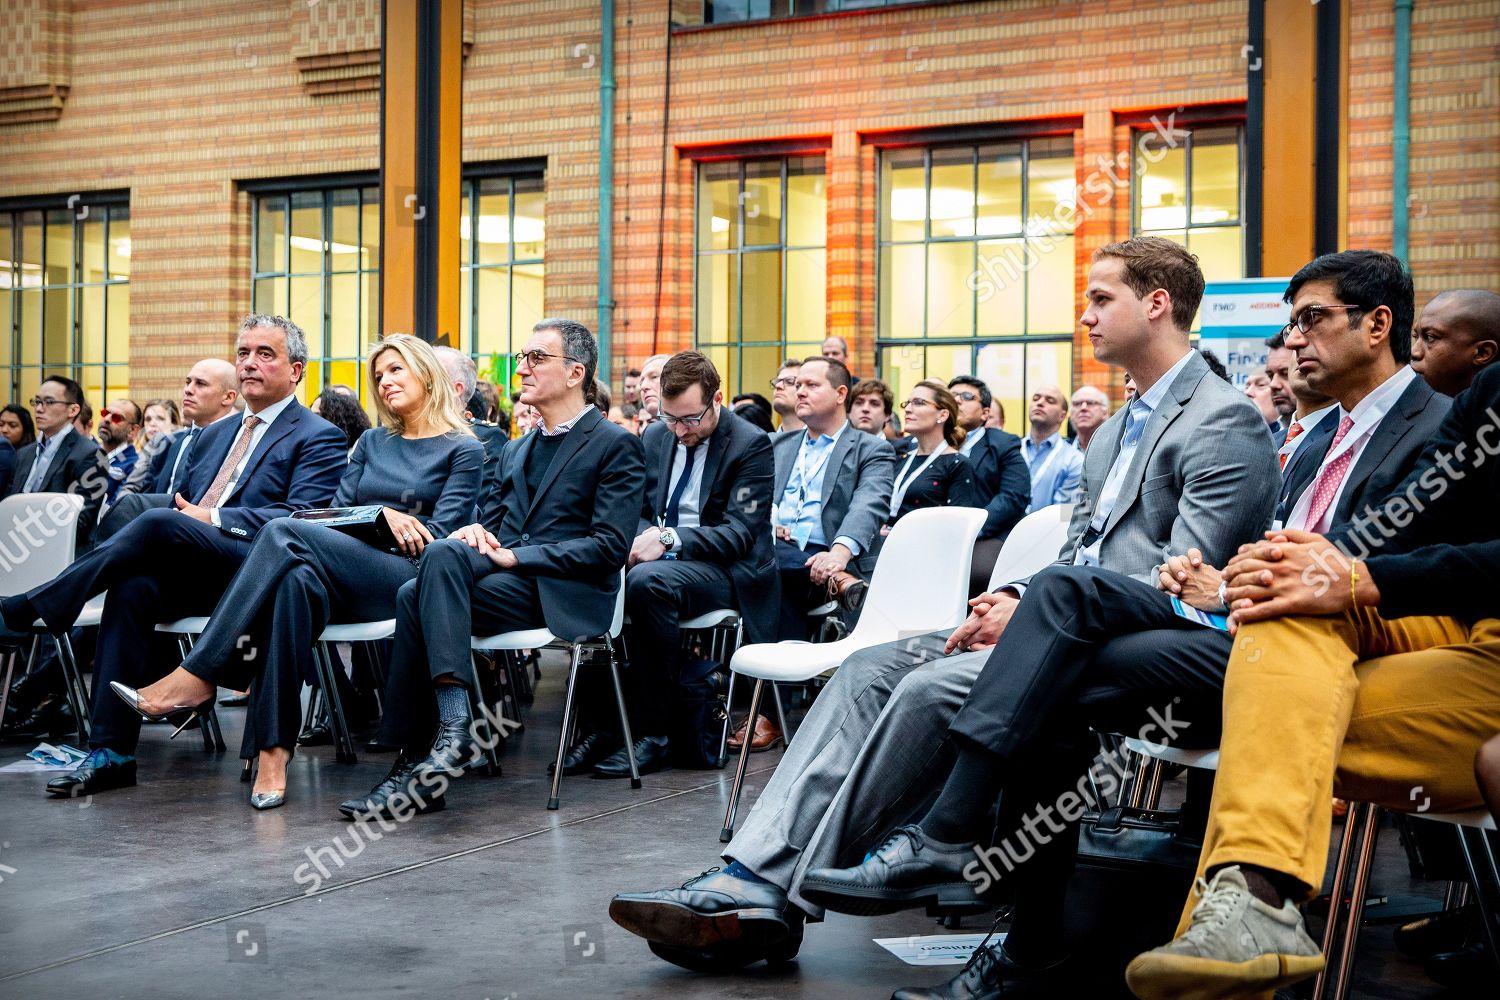 fintech-for-inclusion-conference-the-hague-netherlands-shutterstock-editorial-10098443t.jpg